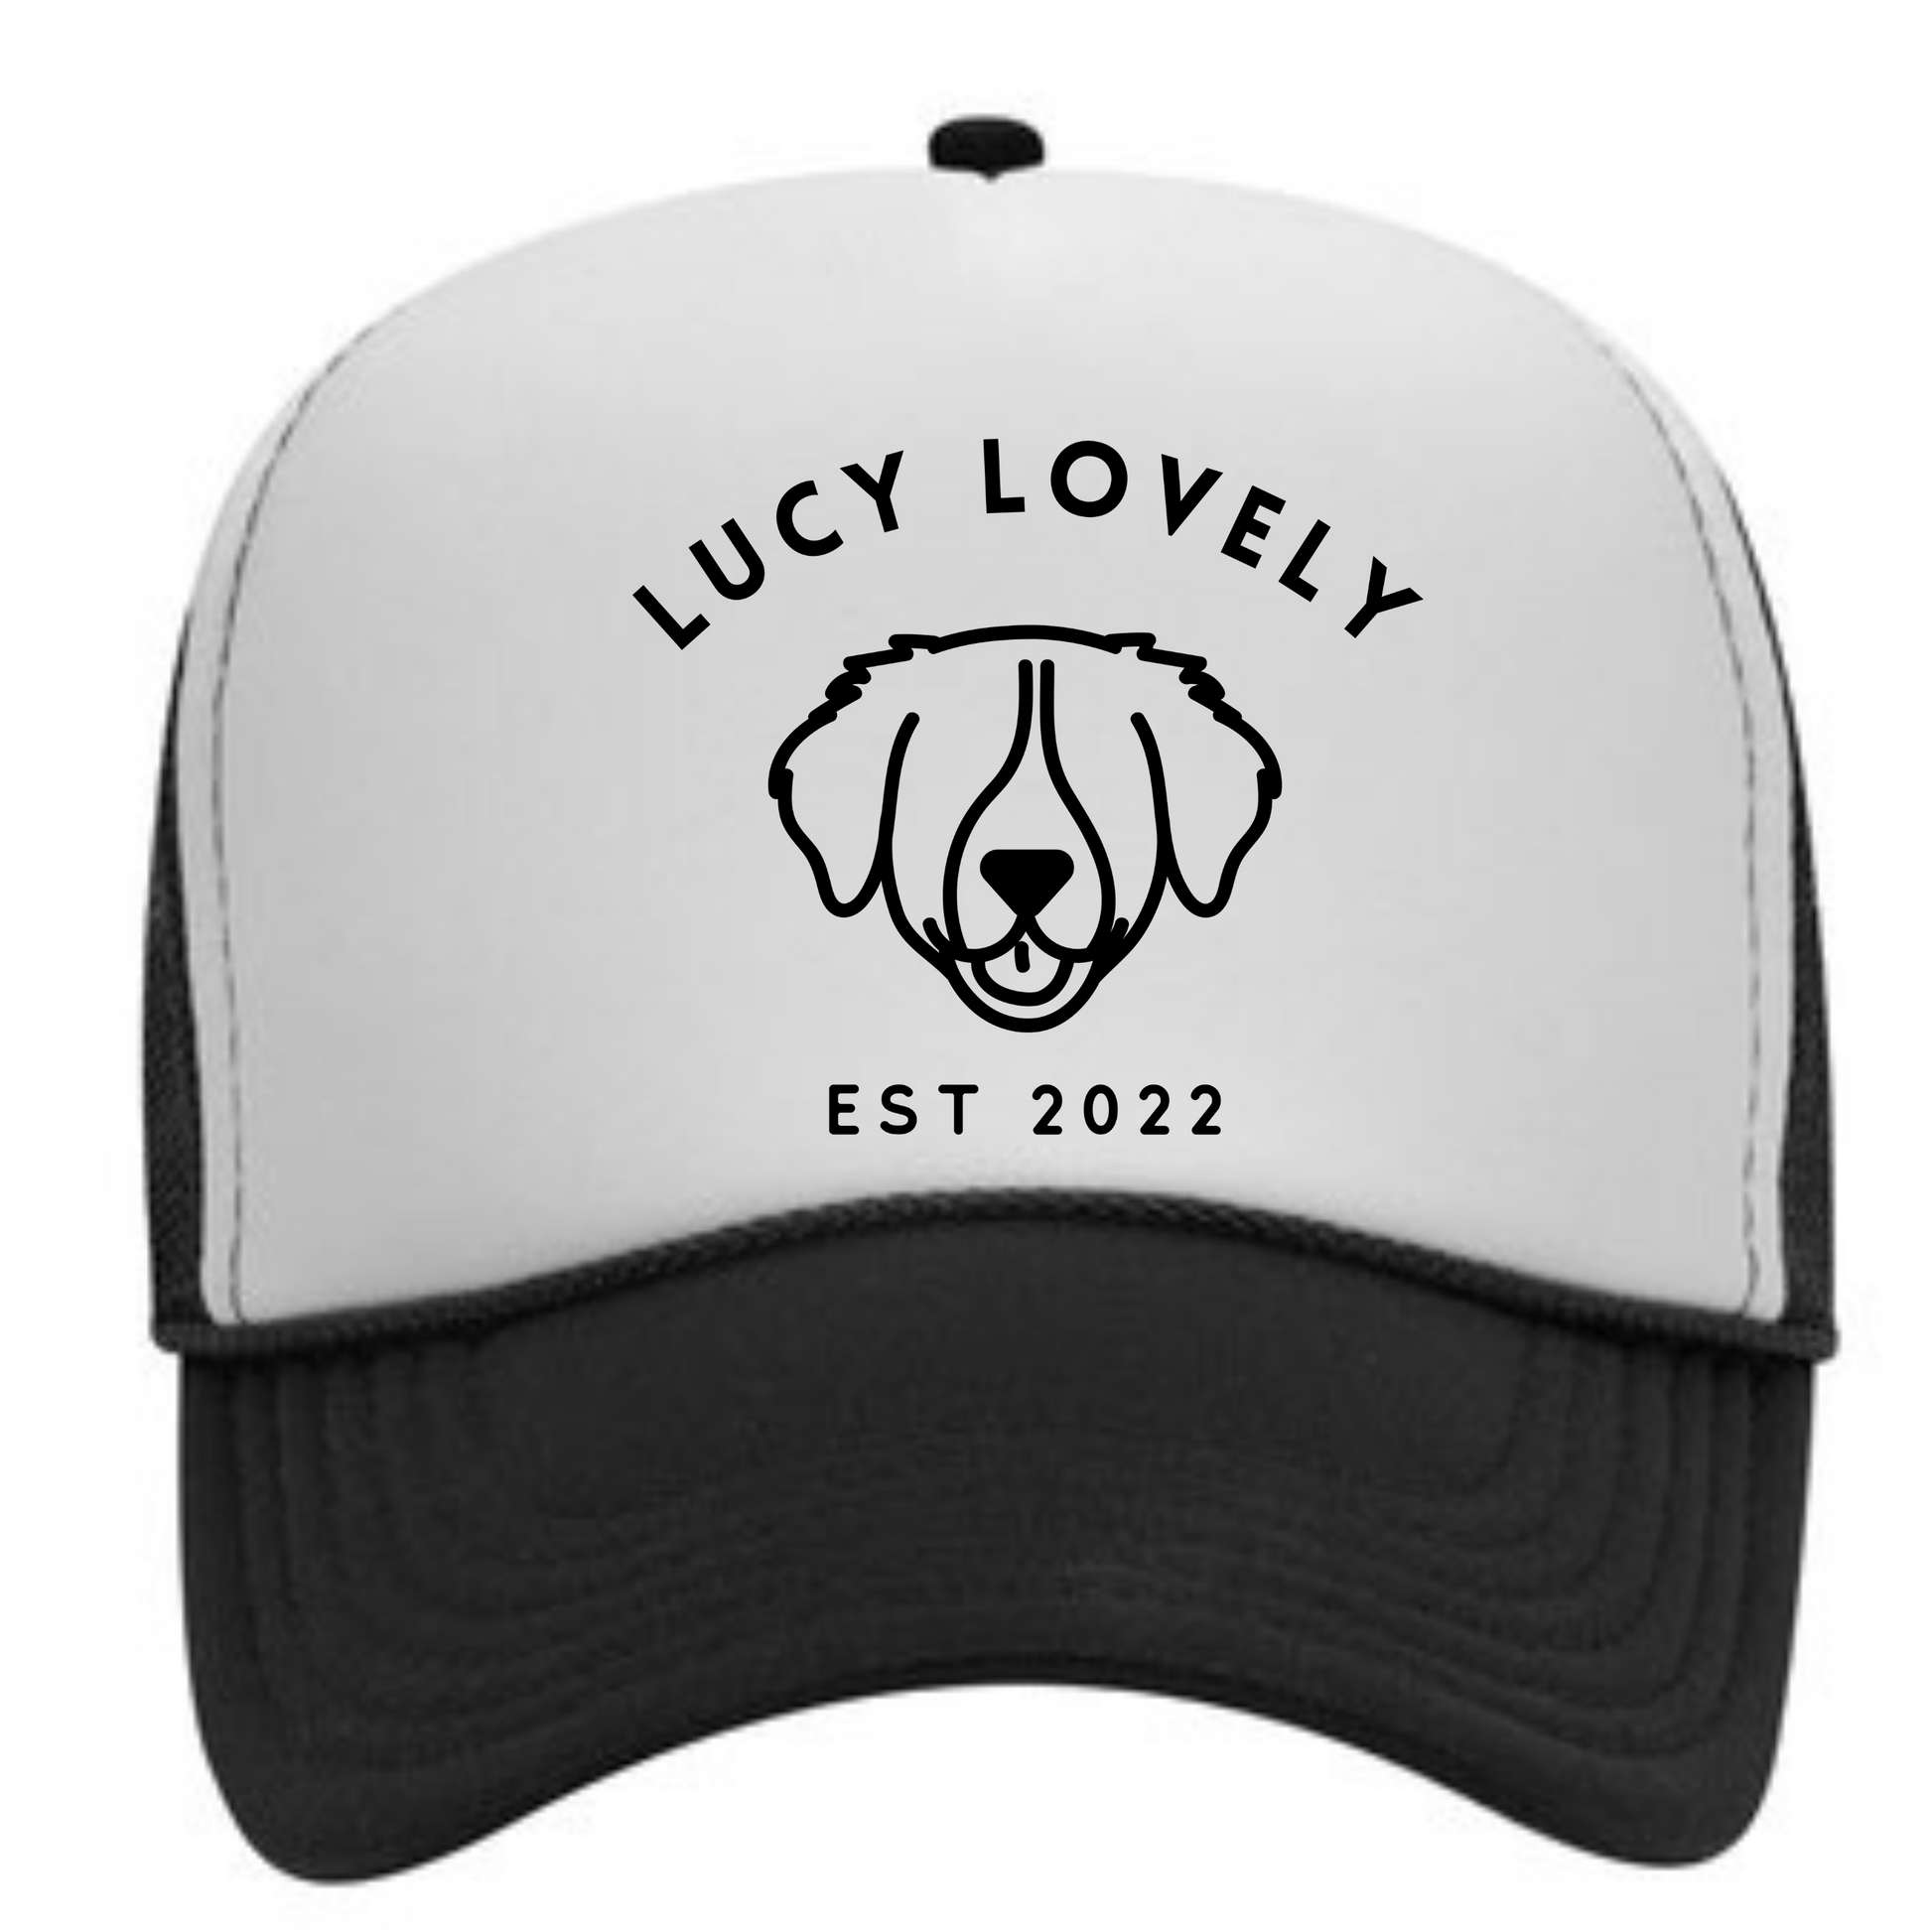 Pick your dog breed foam trucker hat - dog mom hat, dog person hat